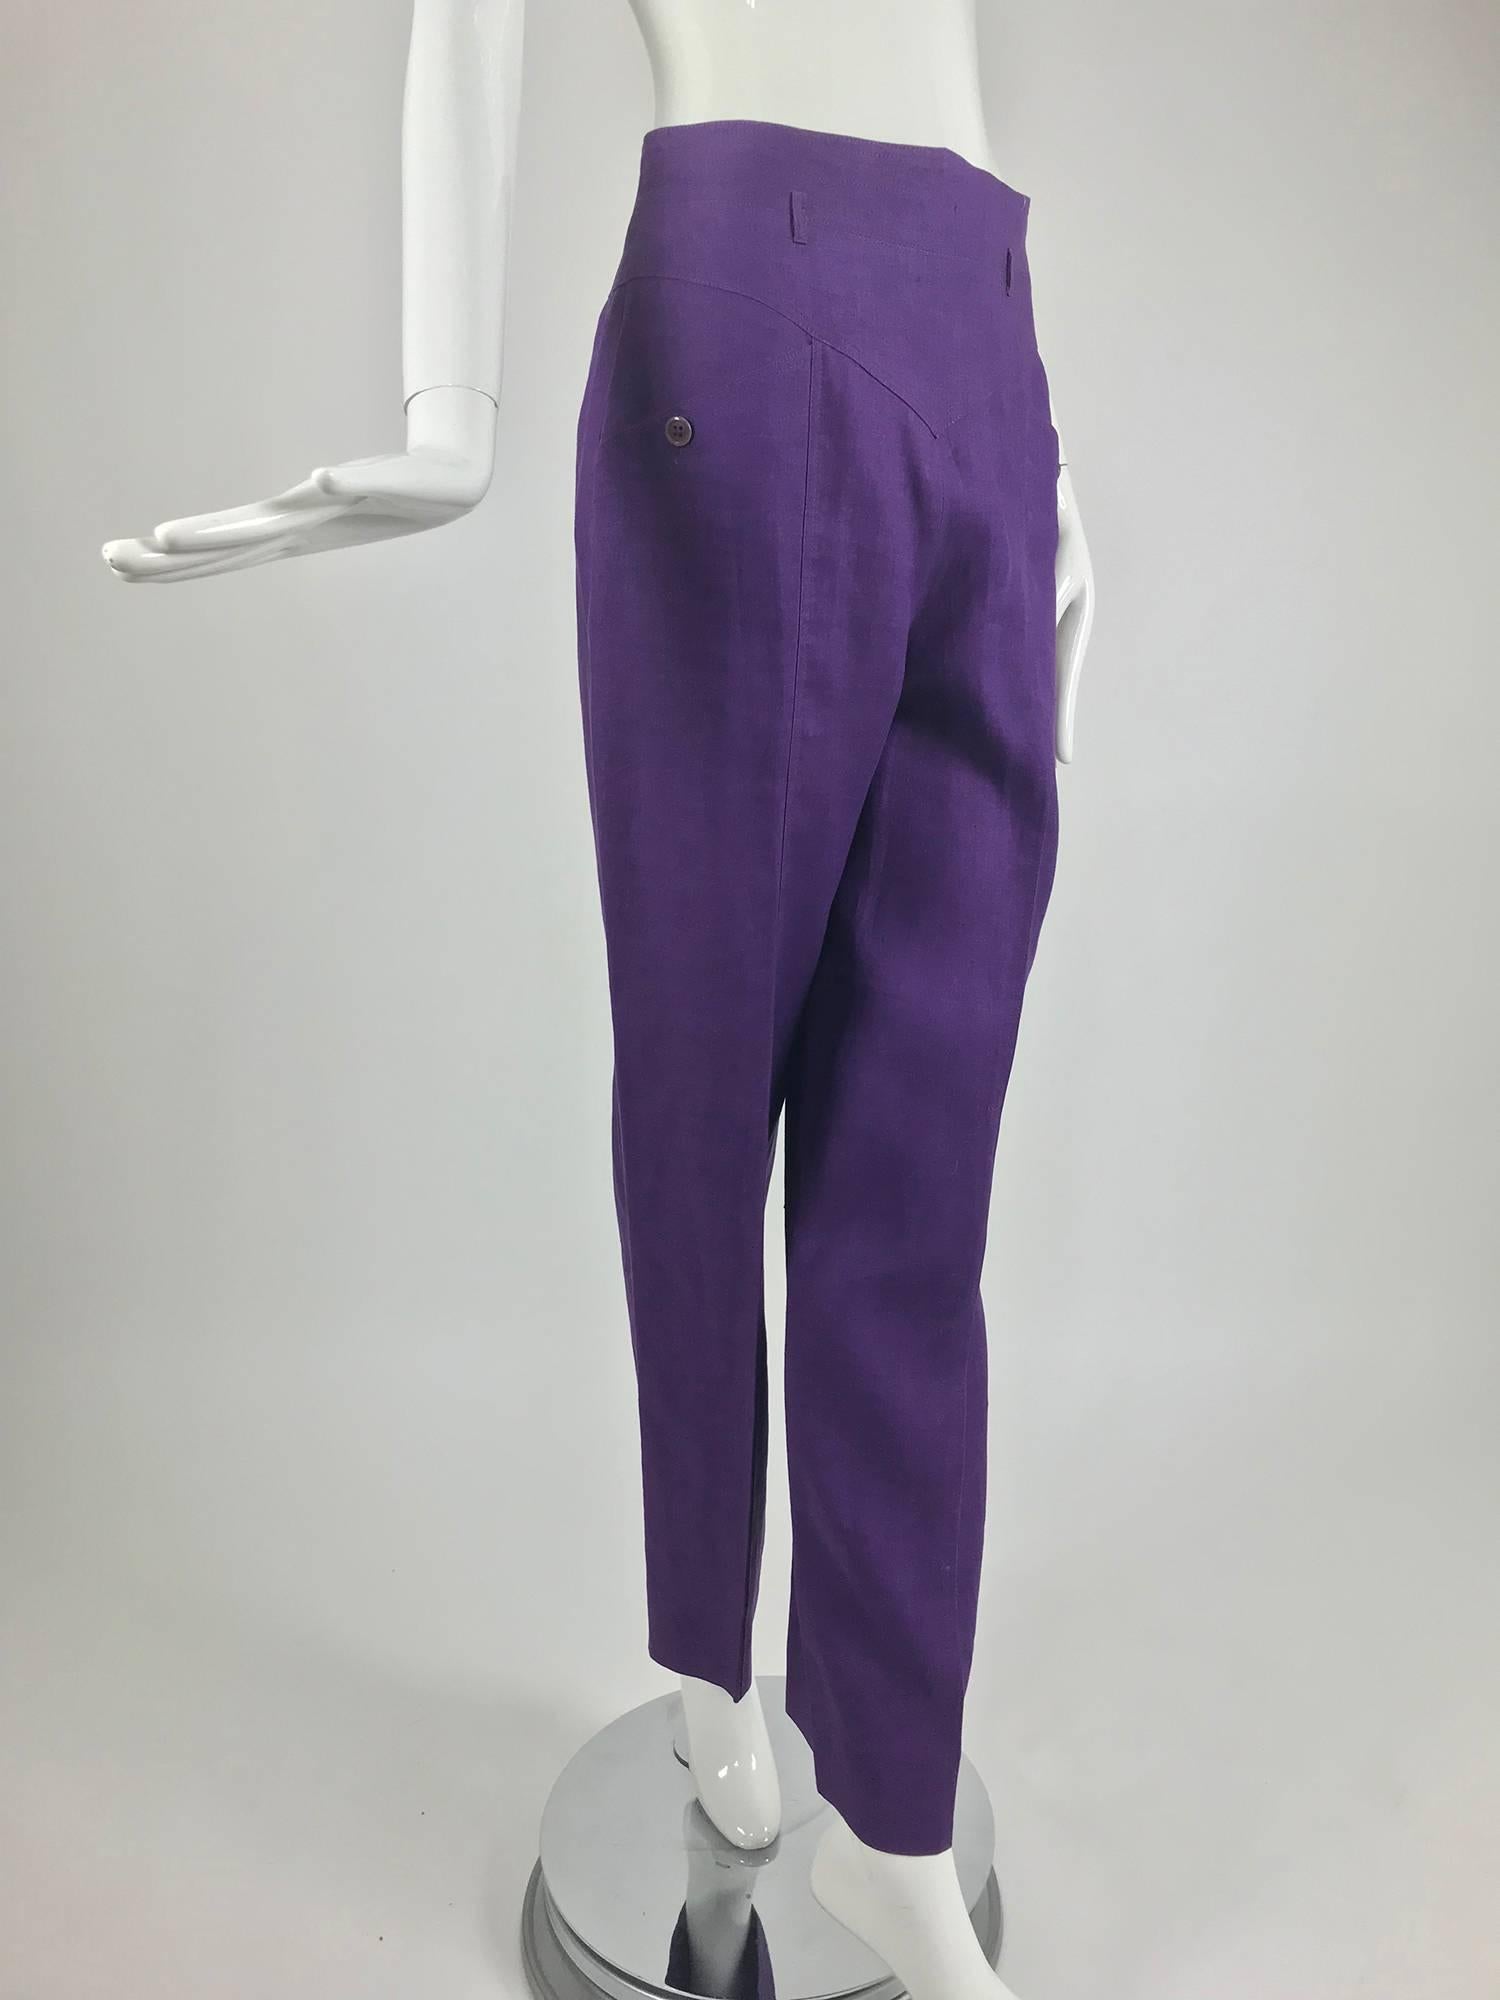 Gucci purple linen high waist trousers from the 1980s...High waist trousers have belt loops at the top (for a narrow belt)...Detailed seaming...Angled button pockets at the hip fronts...Straight wide legs...gorgeous colour...Marked size 44, fits a